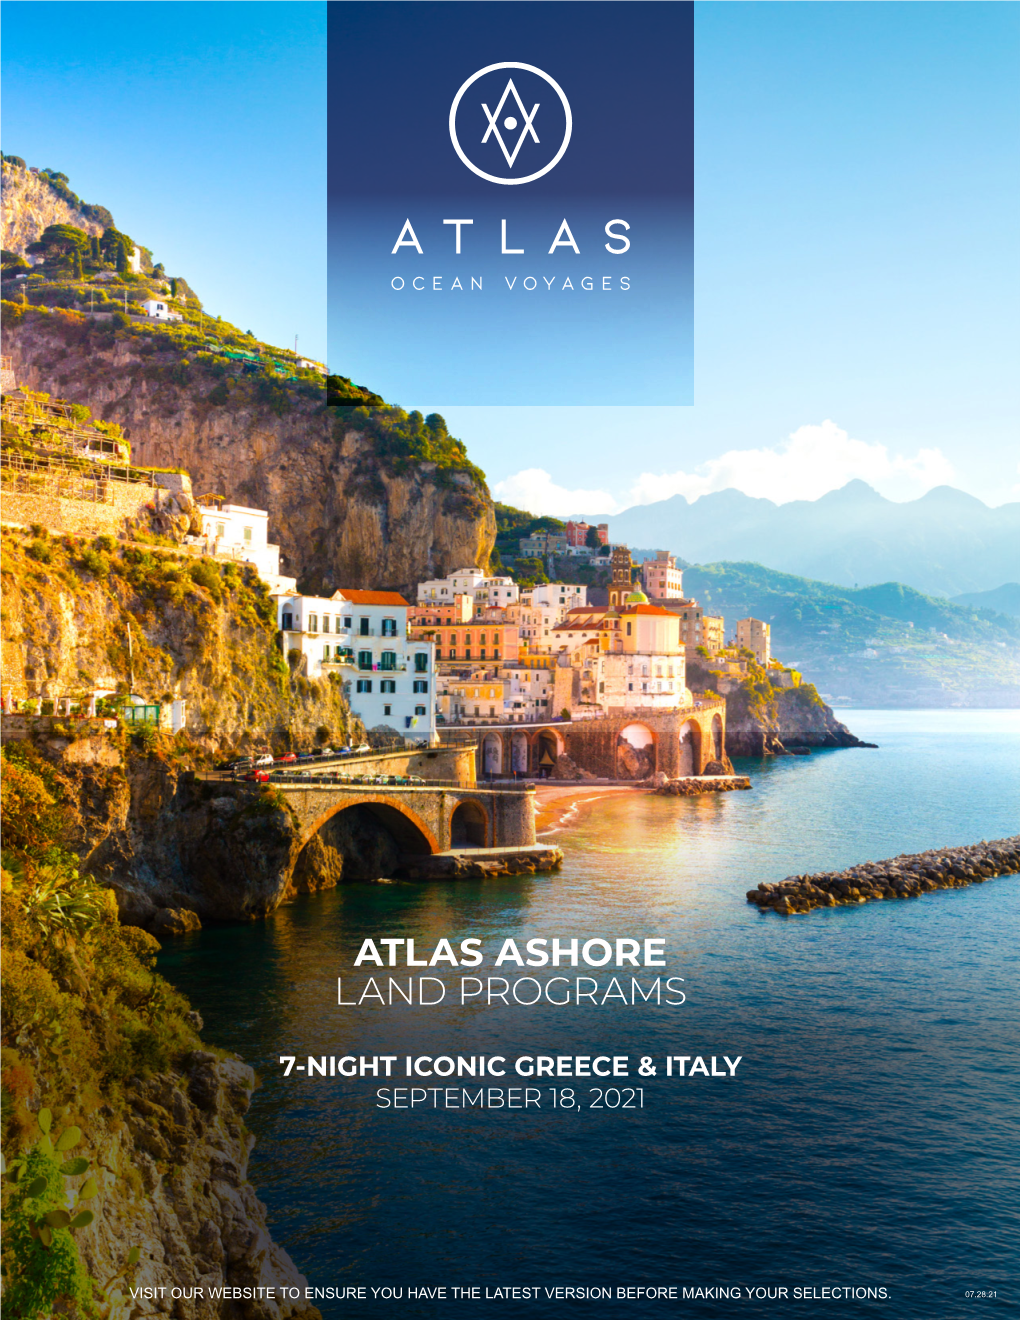 Iconic Greece and Italy Excursions